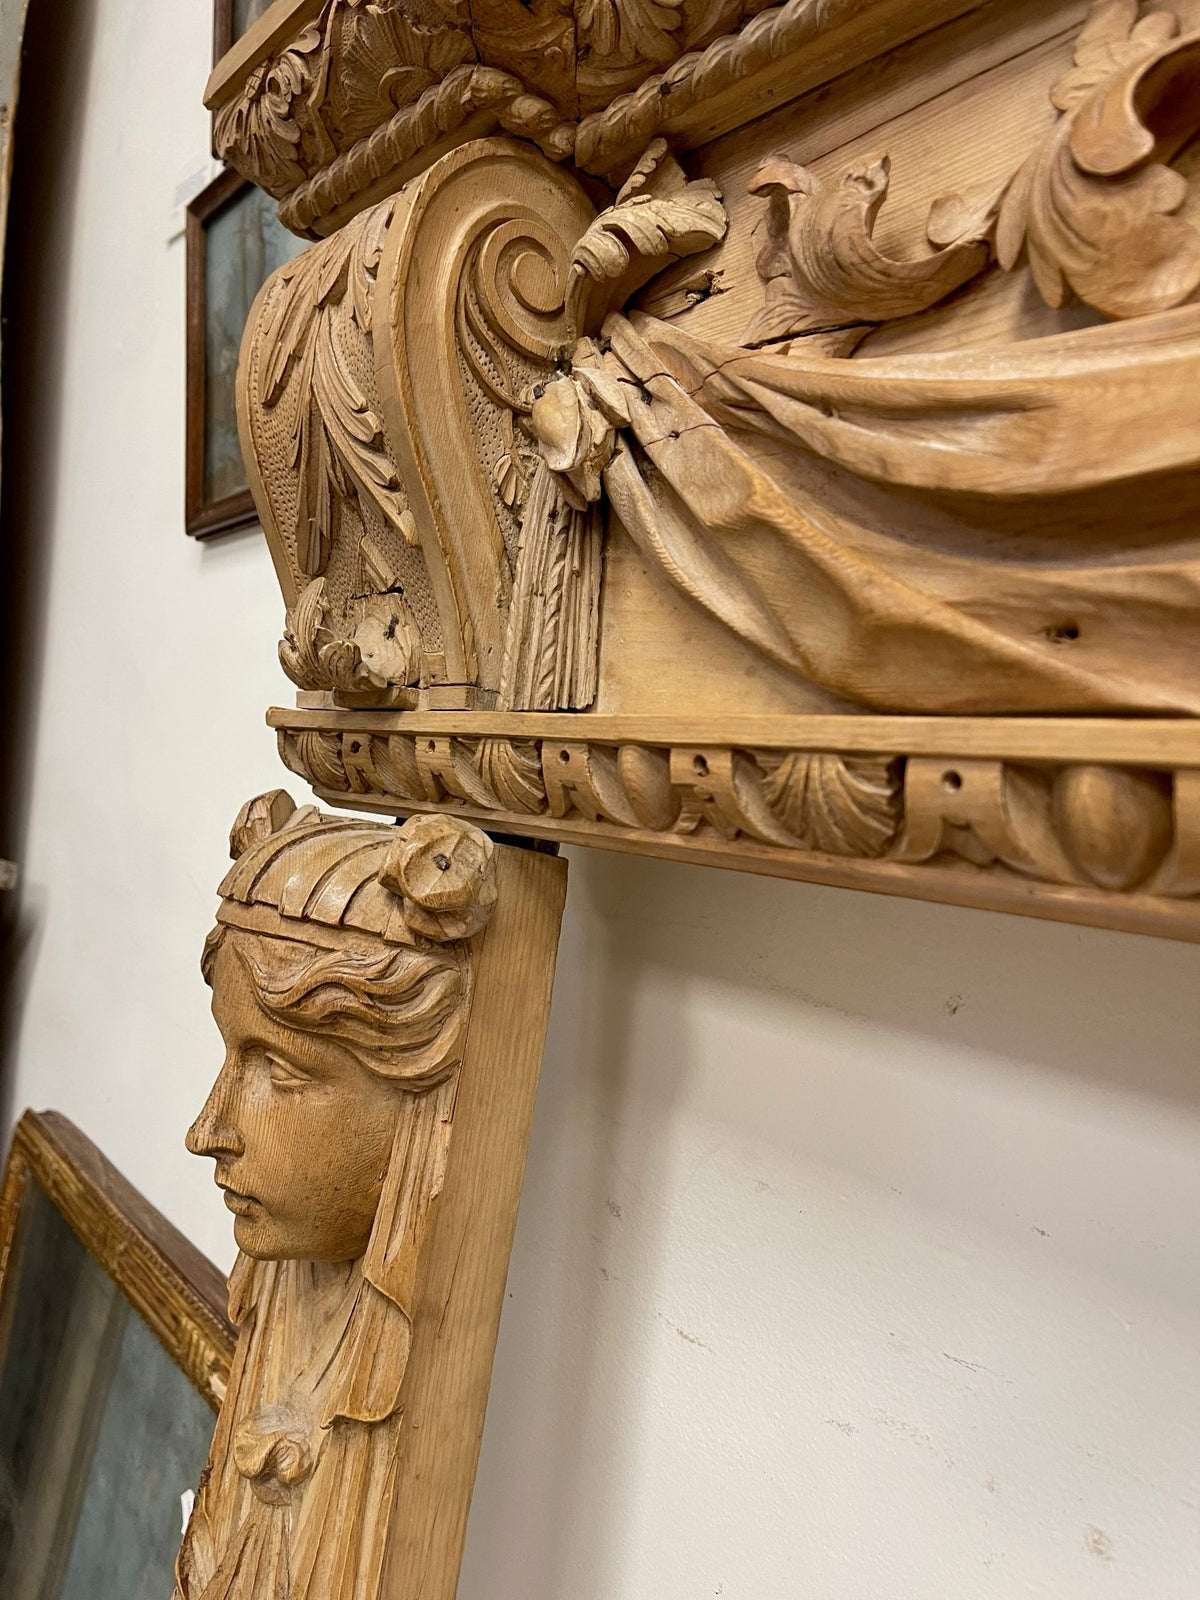 19TH CENTURY FRENCH CLASSICAL CARVED MANTEL - Helen Storey Antiques